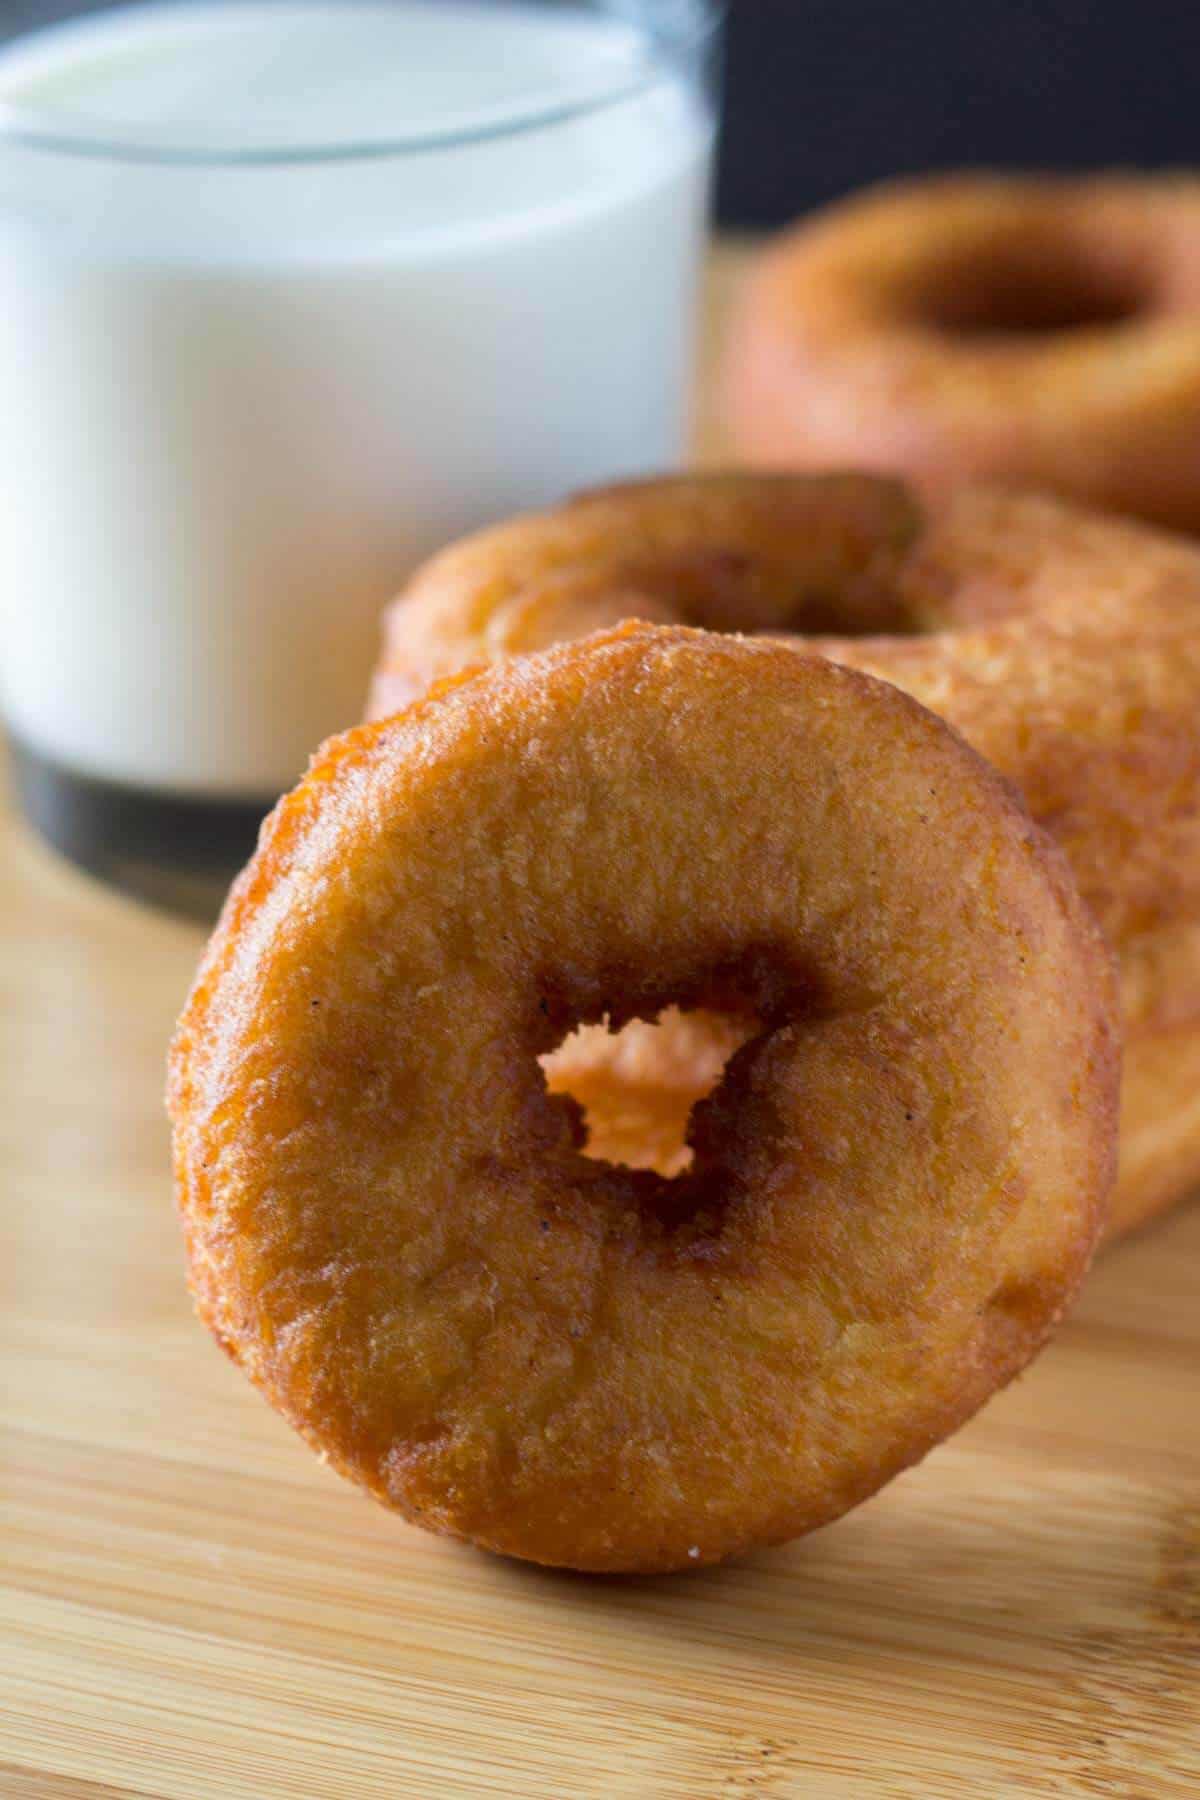 Ready for the MOST delicious doughnuts? Make these Old-Fashioned Cake Doughnuts at home and turn your kitchen into the ultimate bakery!